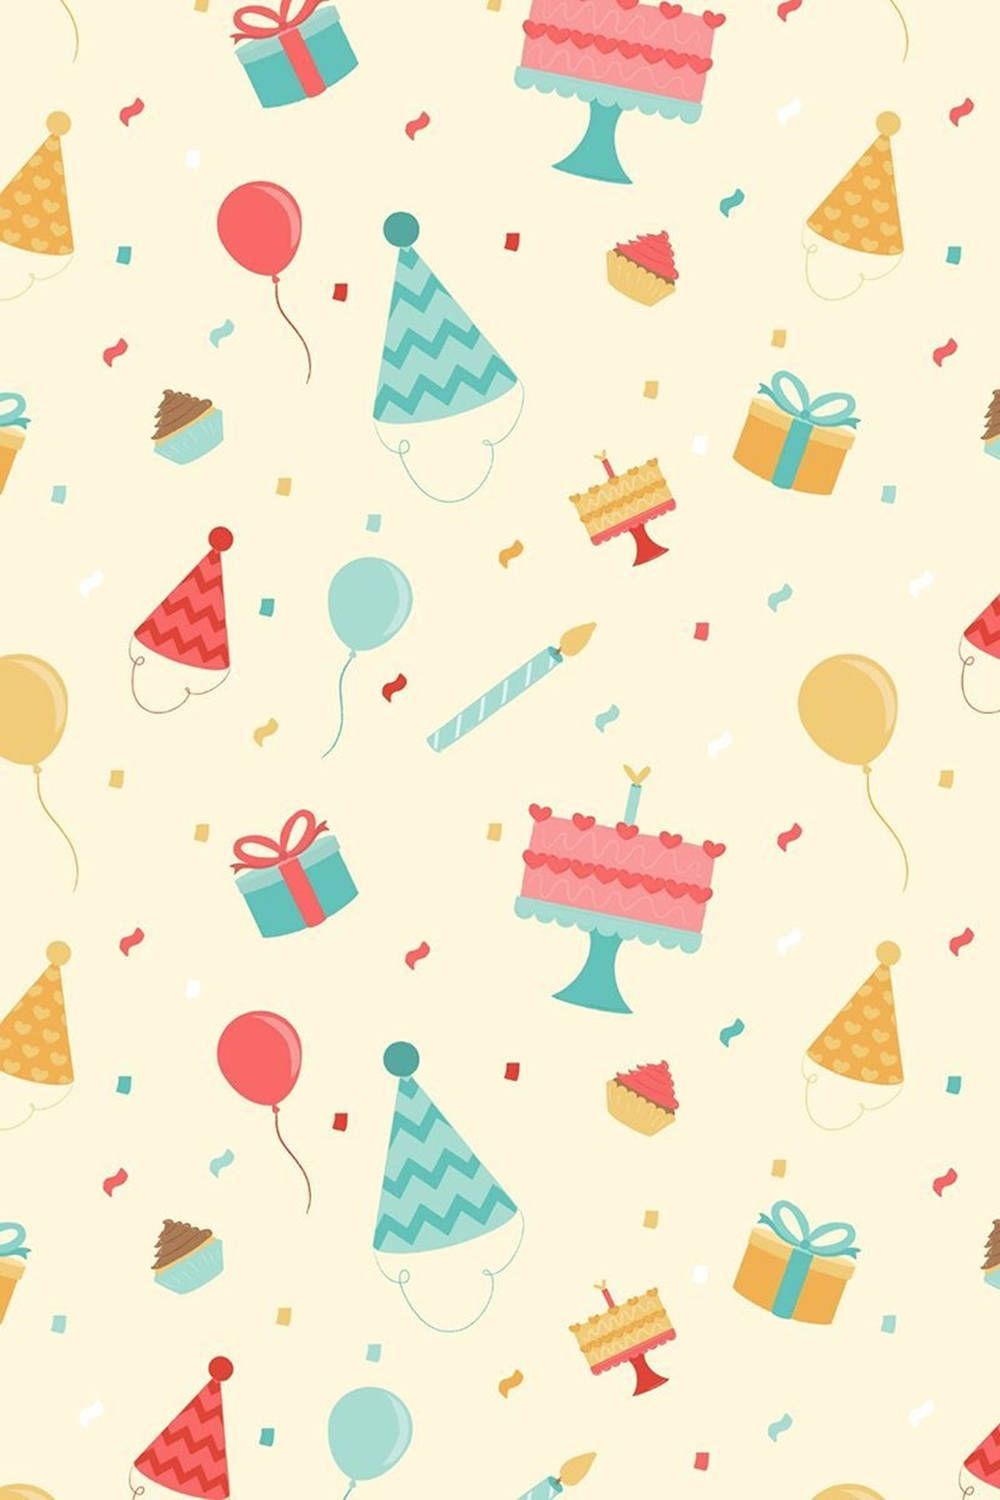 A pattern of birthday party decorations - Birthday